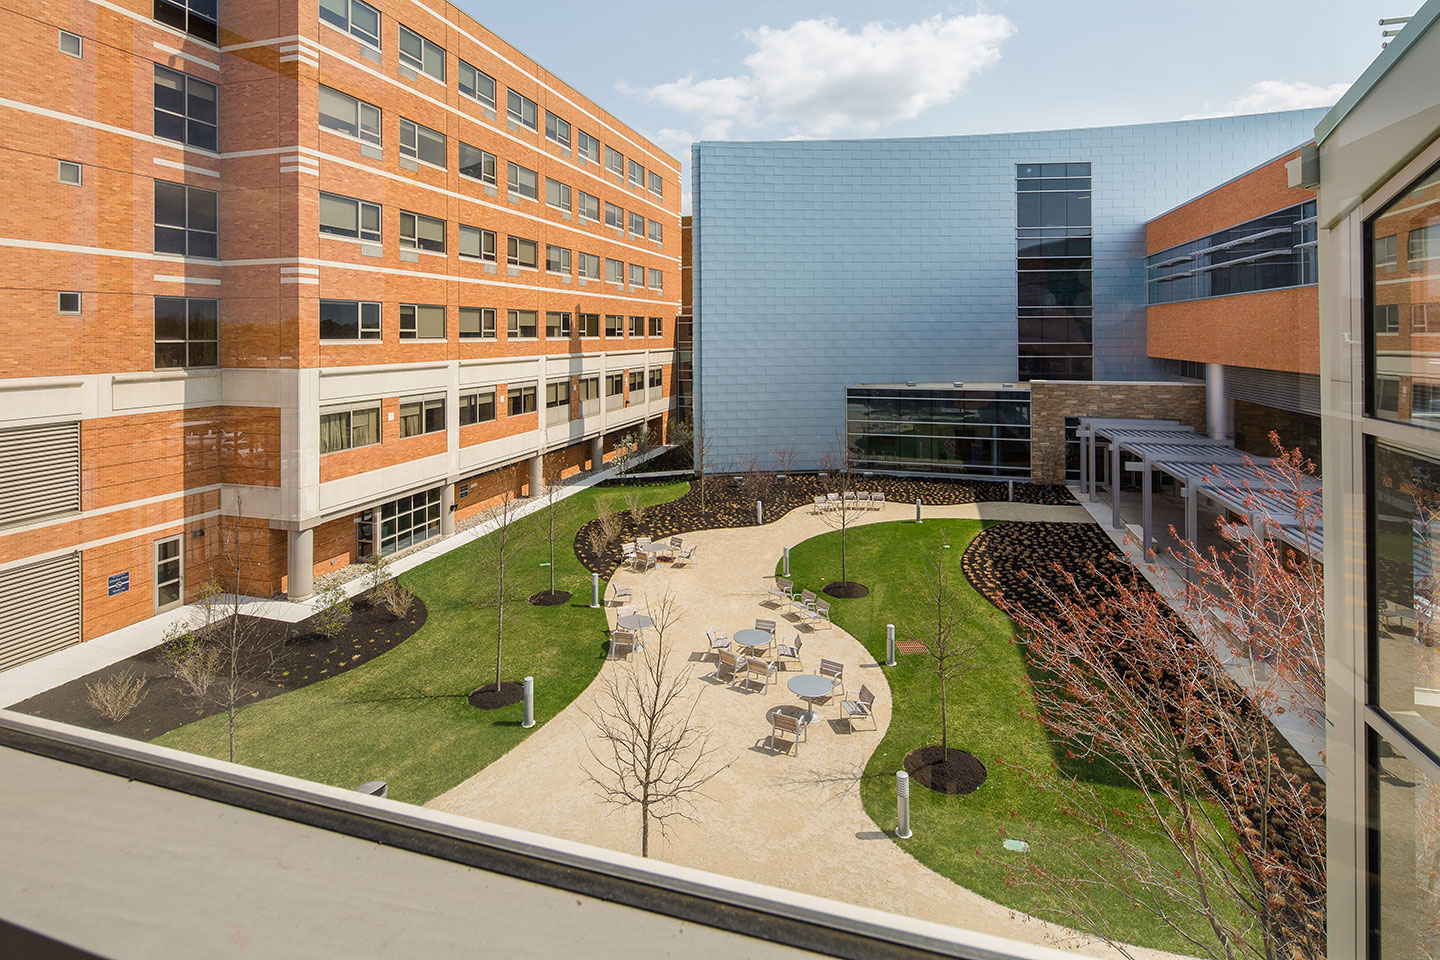 We conducted site/civil, planning, landscape architecture, permitting, and environmental services for the expansion at Ocean Medical Center in Brick Township, New Jersey.